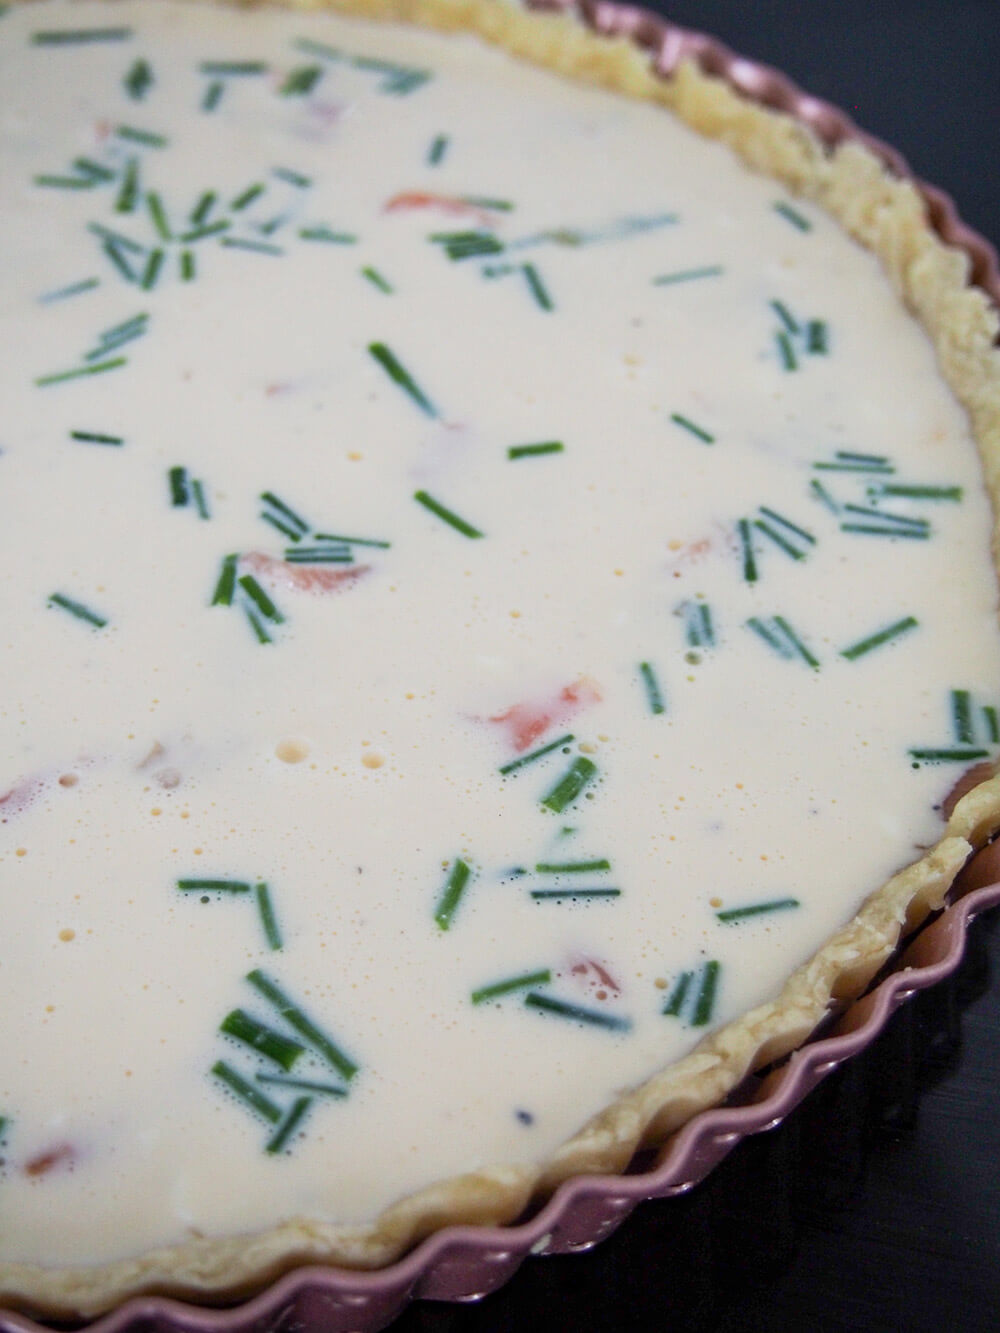 egg sour cream mixture added ready to bake smoked salmon quiche